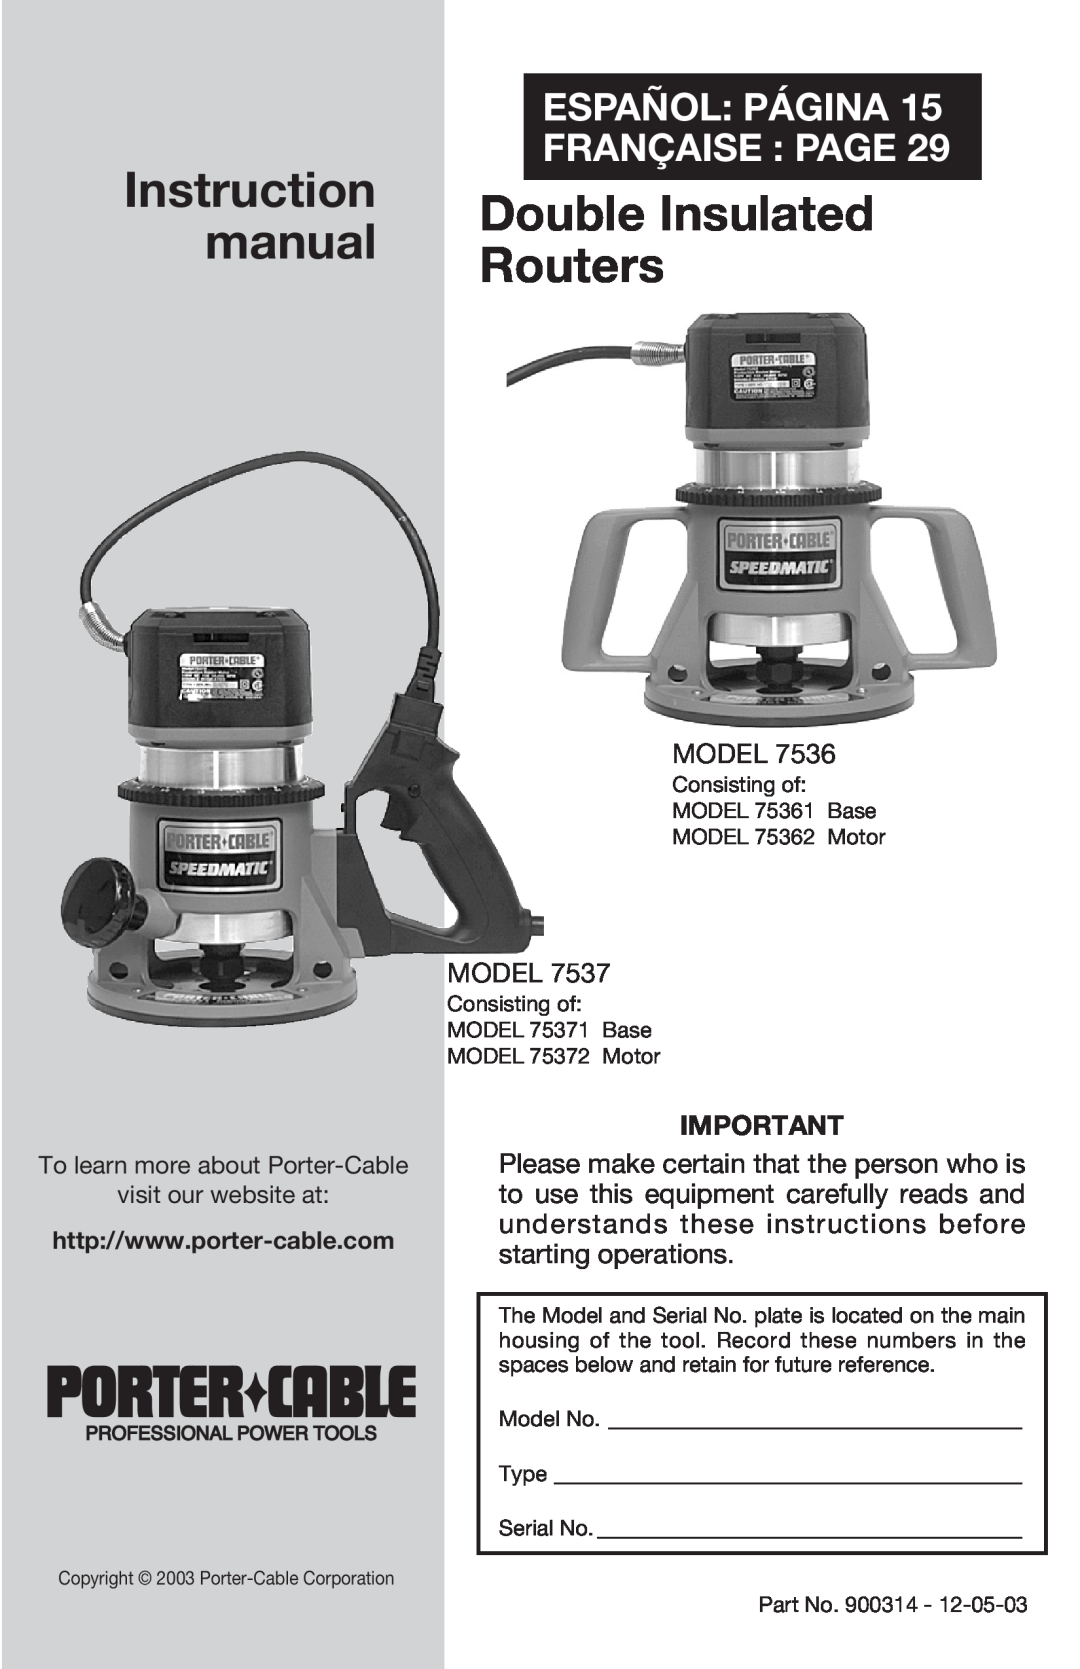 Porter-Cable 7536 instruction manual Model, Double Insulated, Routers, Instruction, Español Página, Française Page 